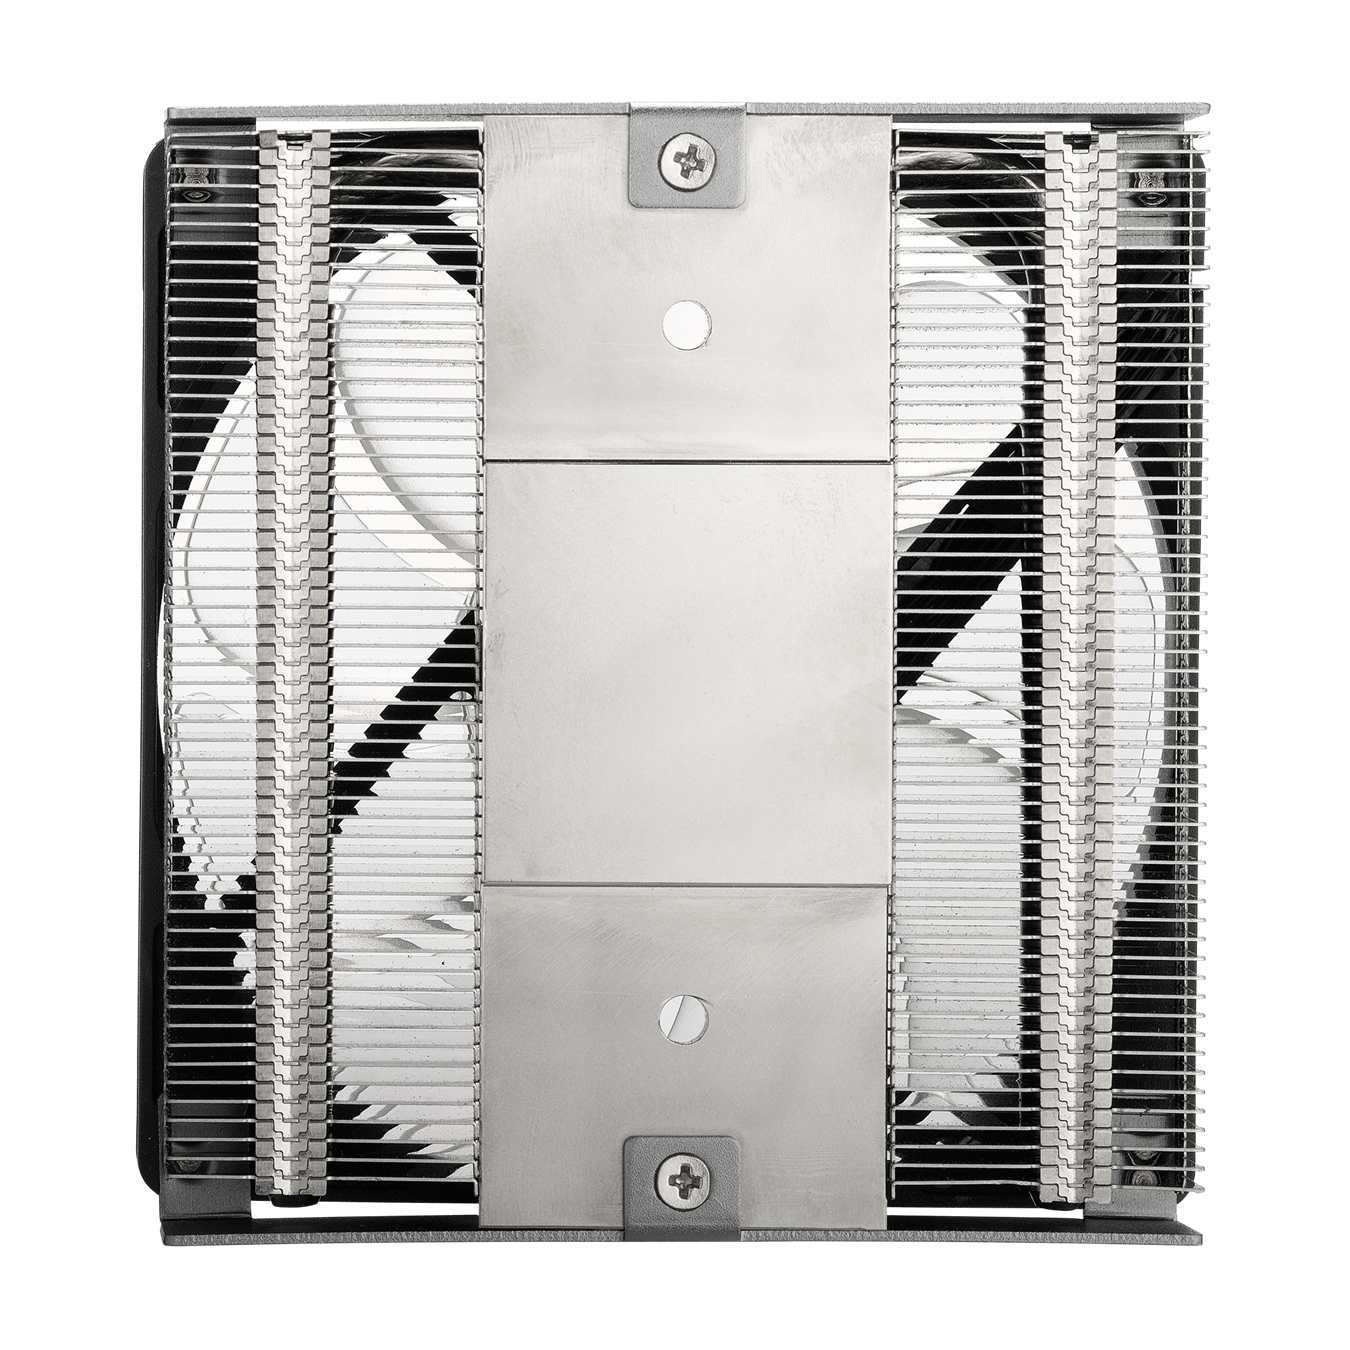 Strategically shaped heat pipe design for an ultra-compact cooler that maximizes heat dissipation